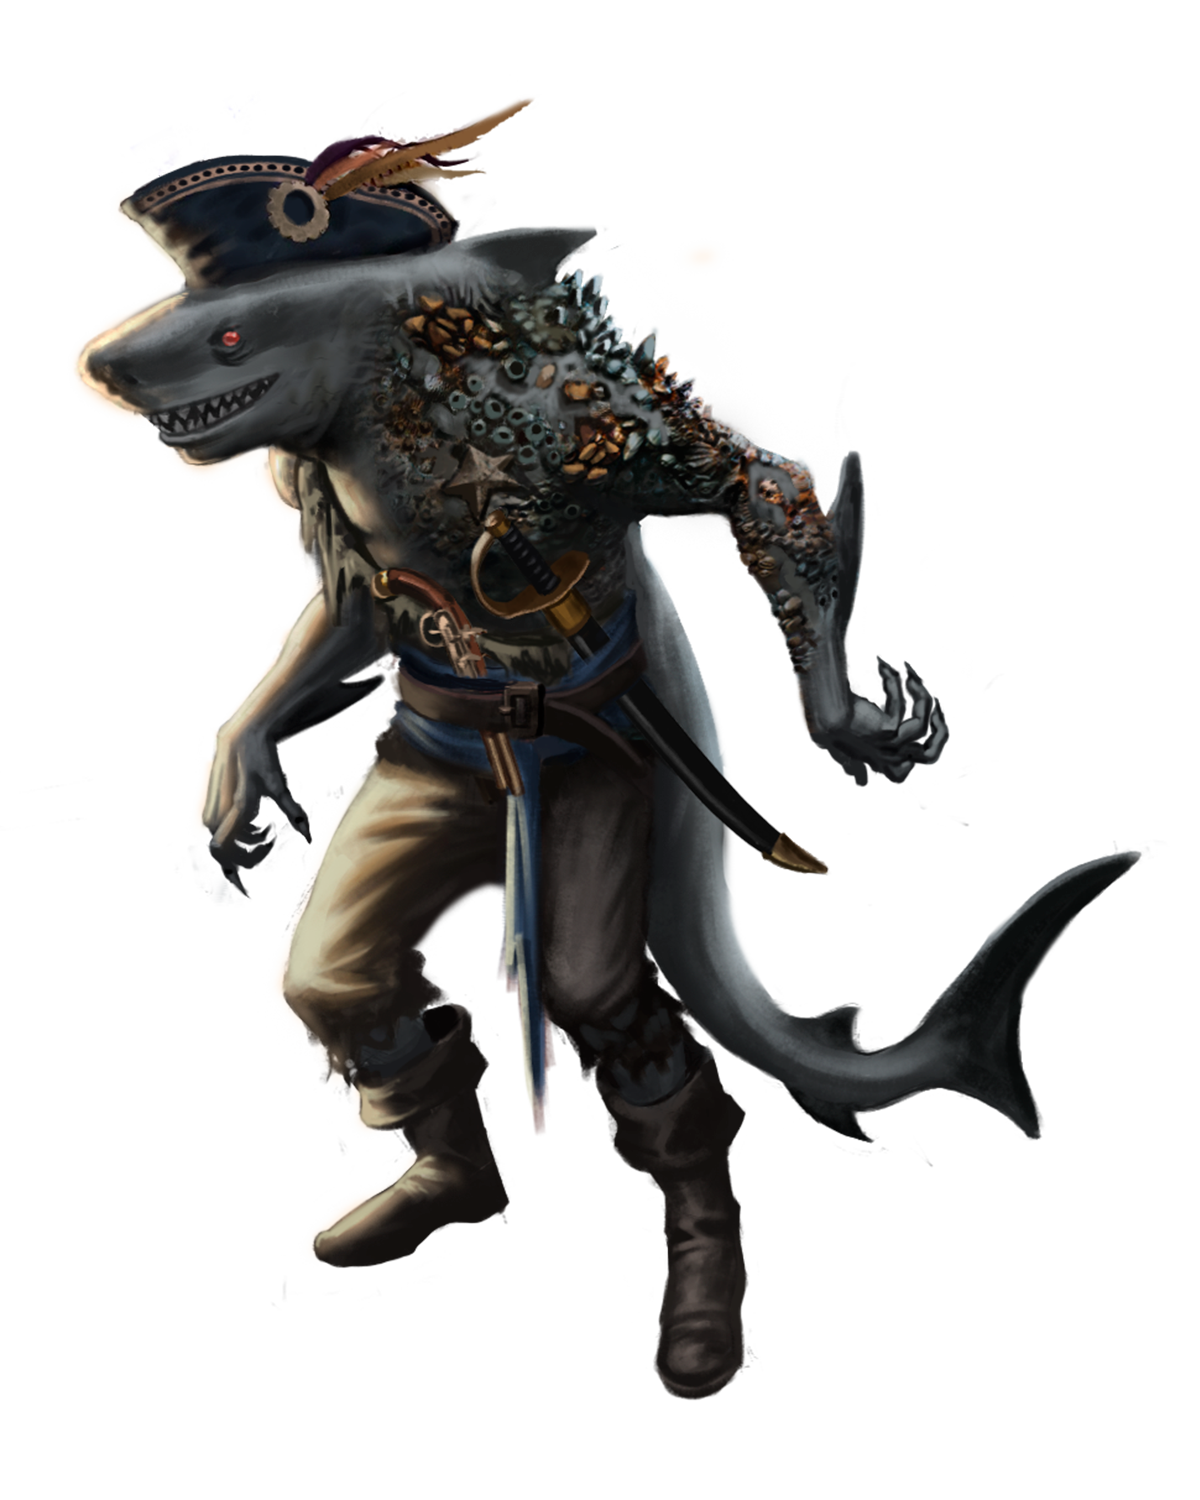 artist Alecksander Ribeiro : Barnacle Barnaby, a shark lacedon covered in barnacles and wearing pirate gear.